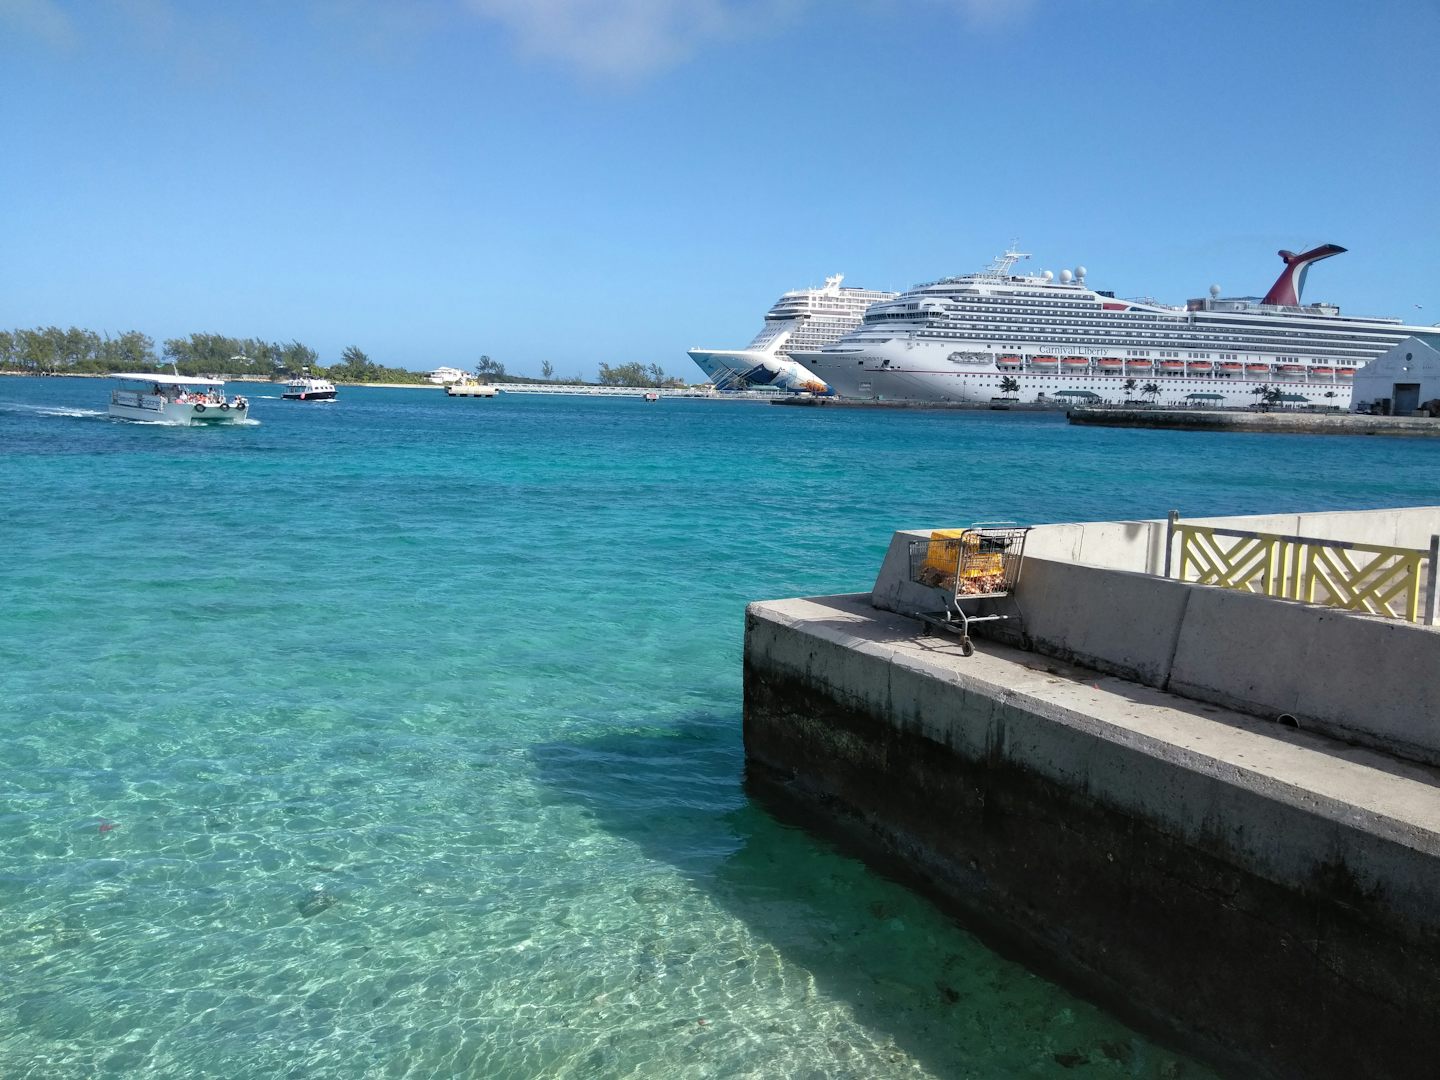 Beautiful view in Nassau of our cruise ship. We went on this for my husband